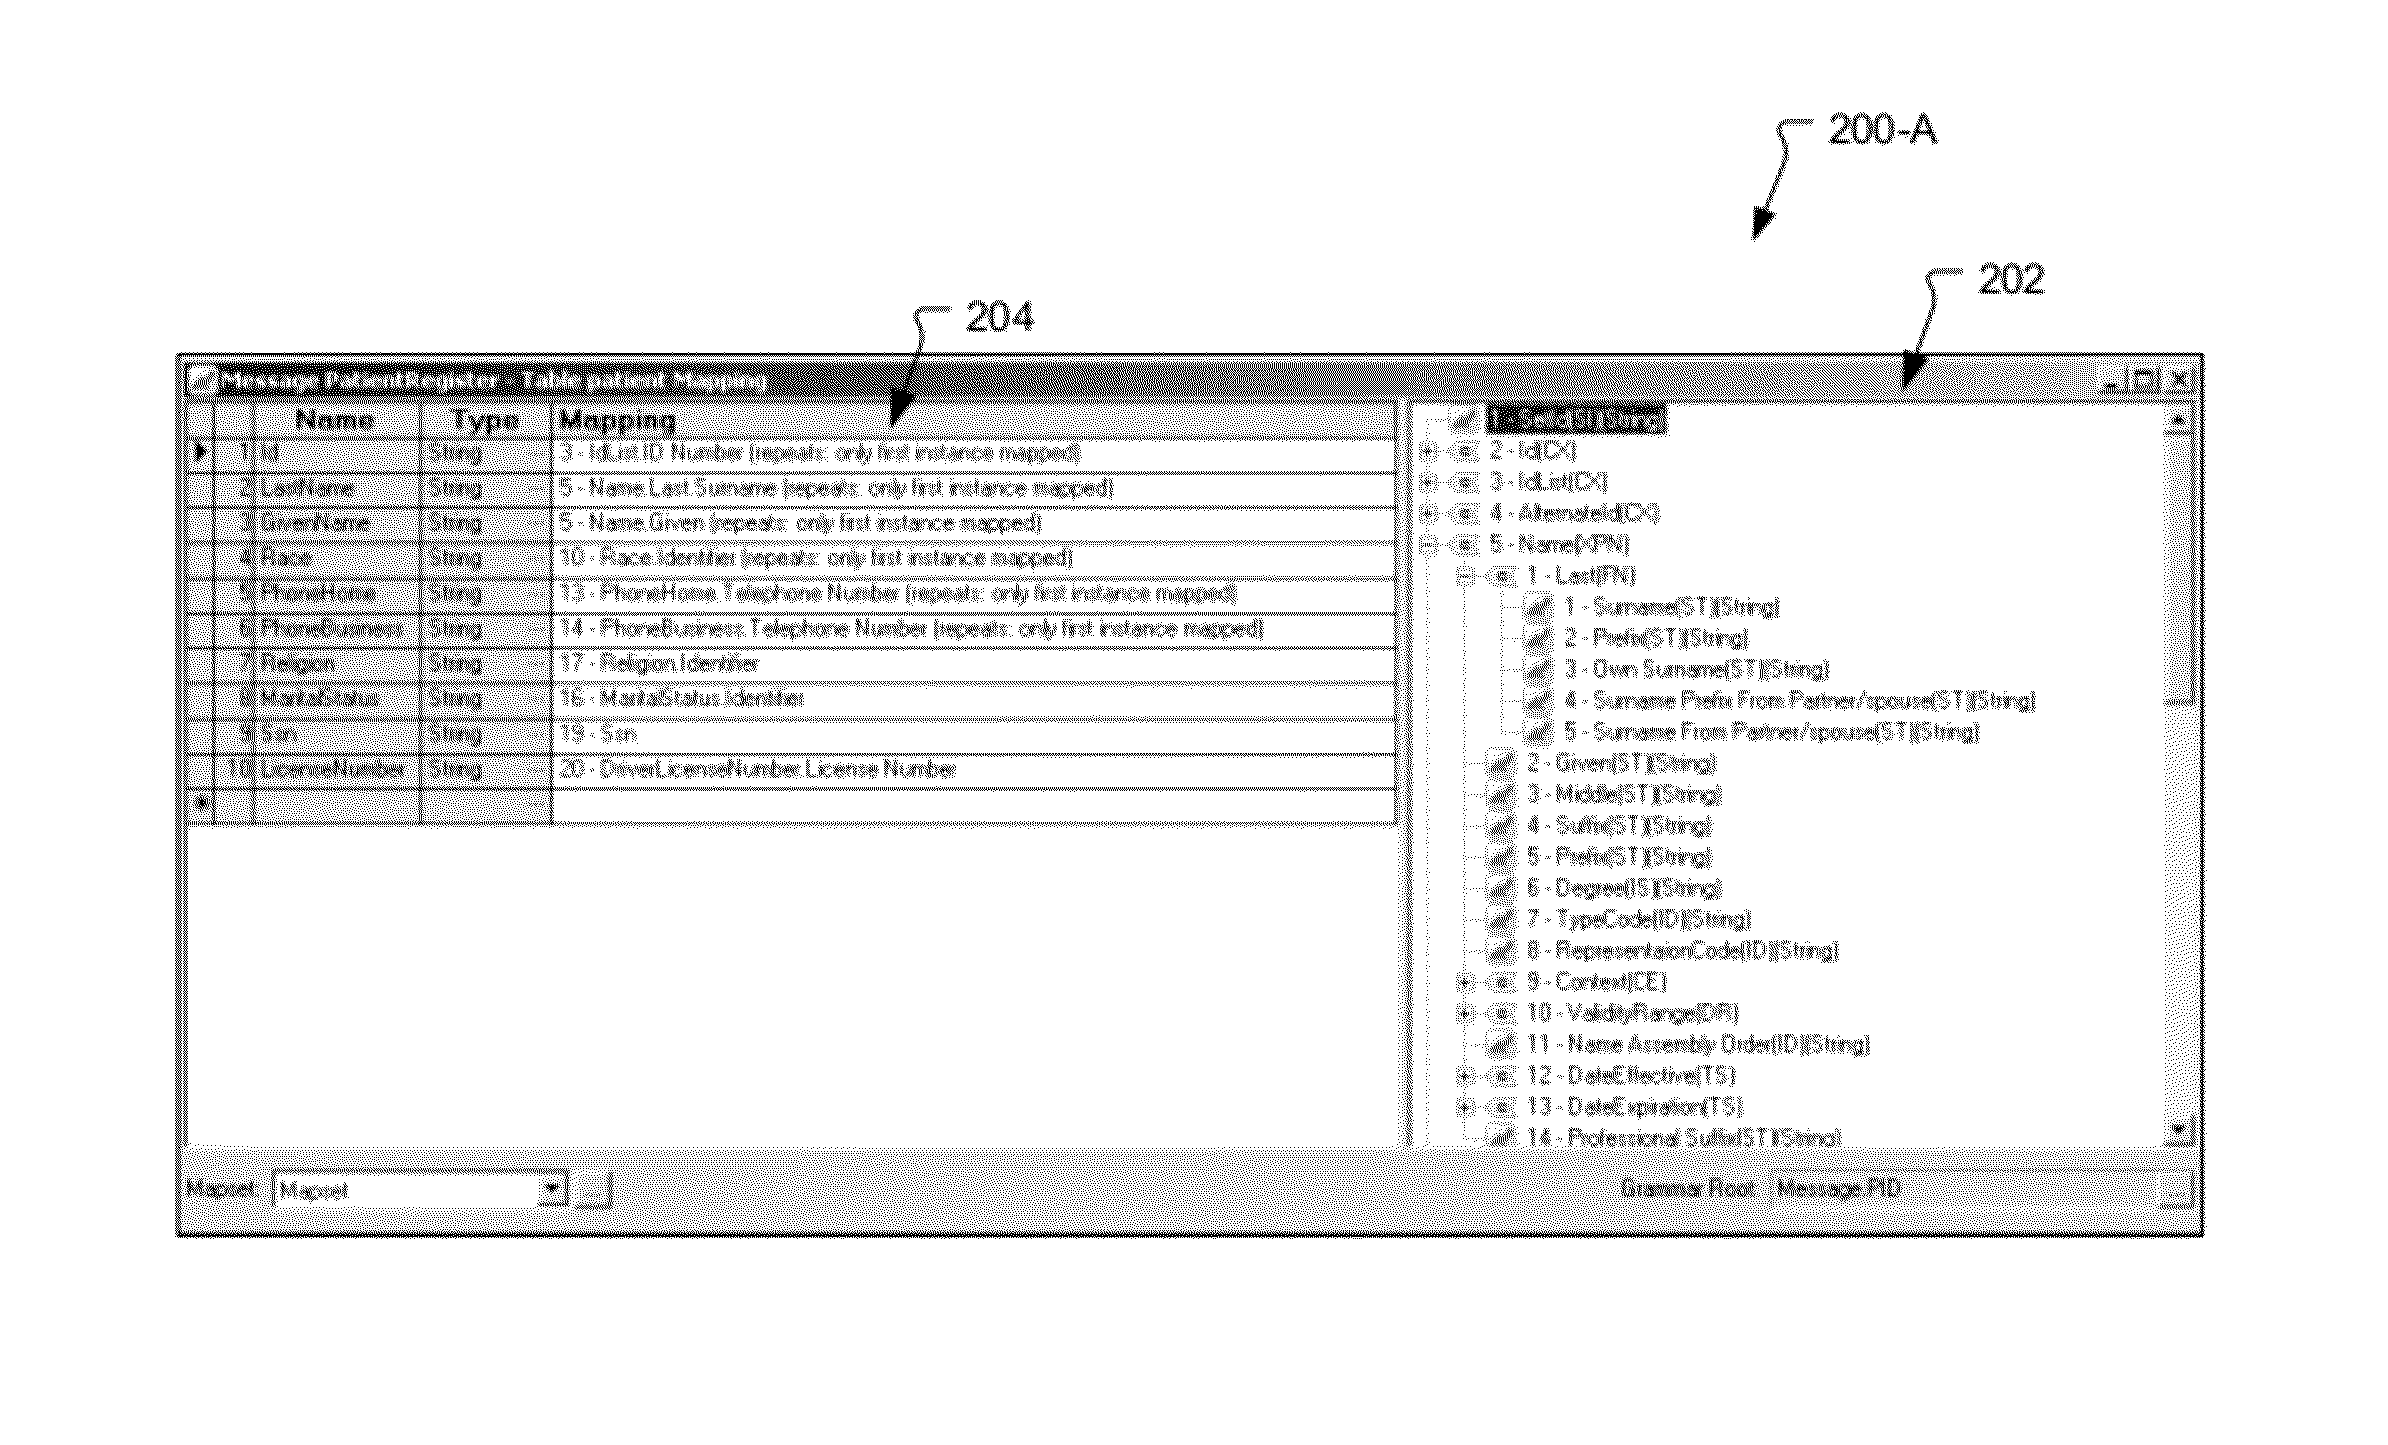 Method and system for displaying selectable autocompletion suggestions and annotations in mapping tool